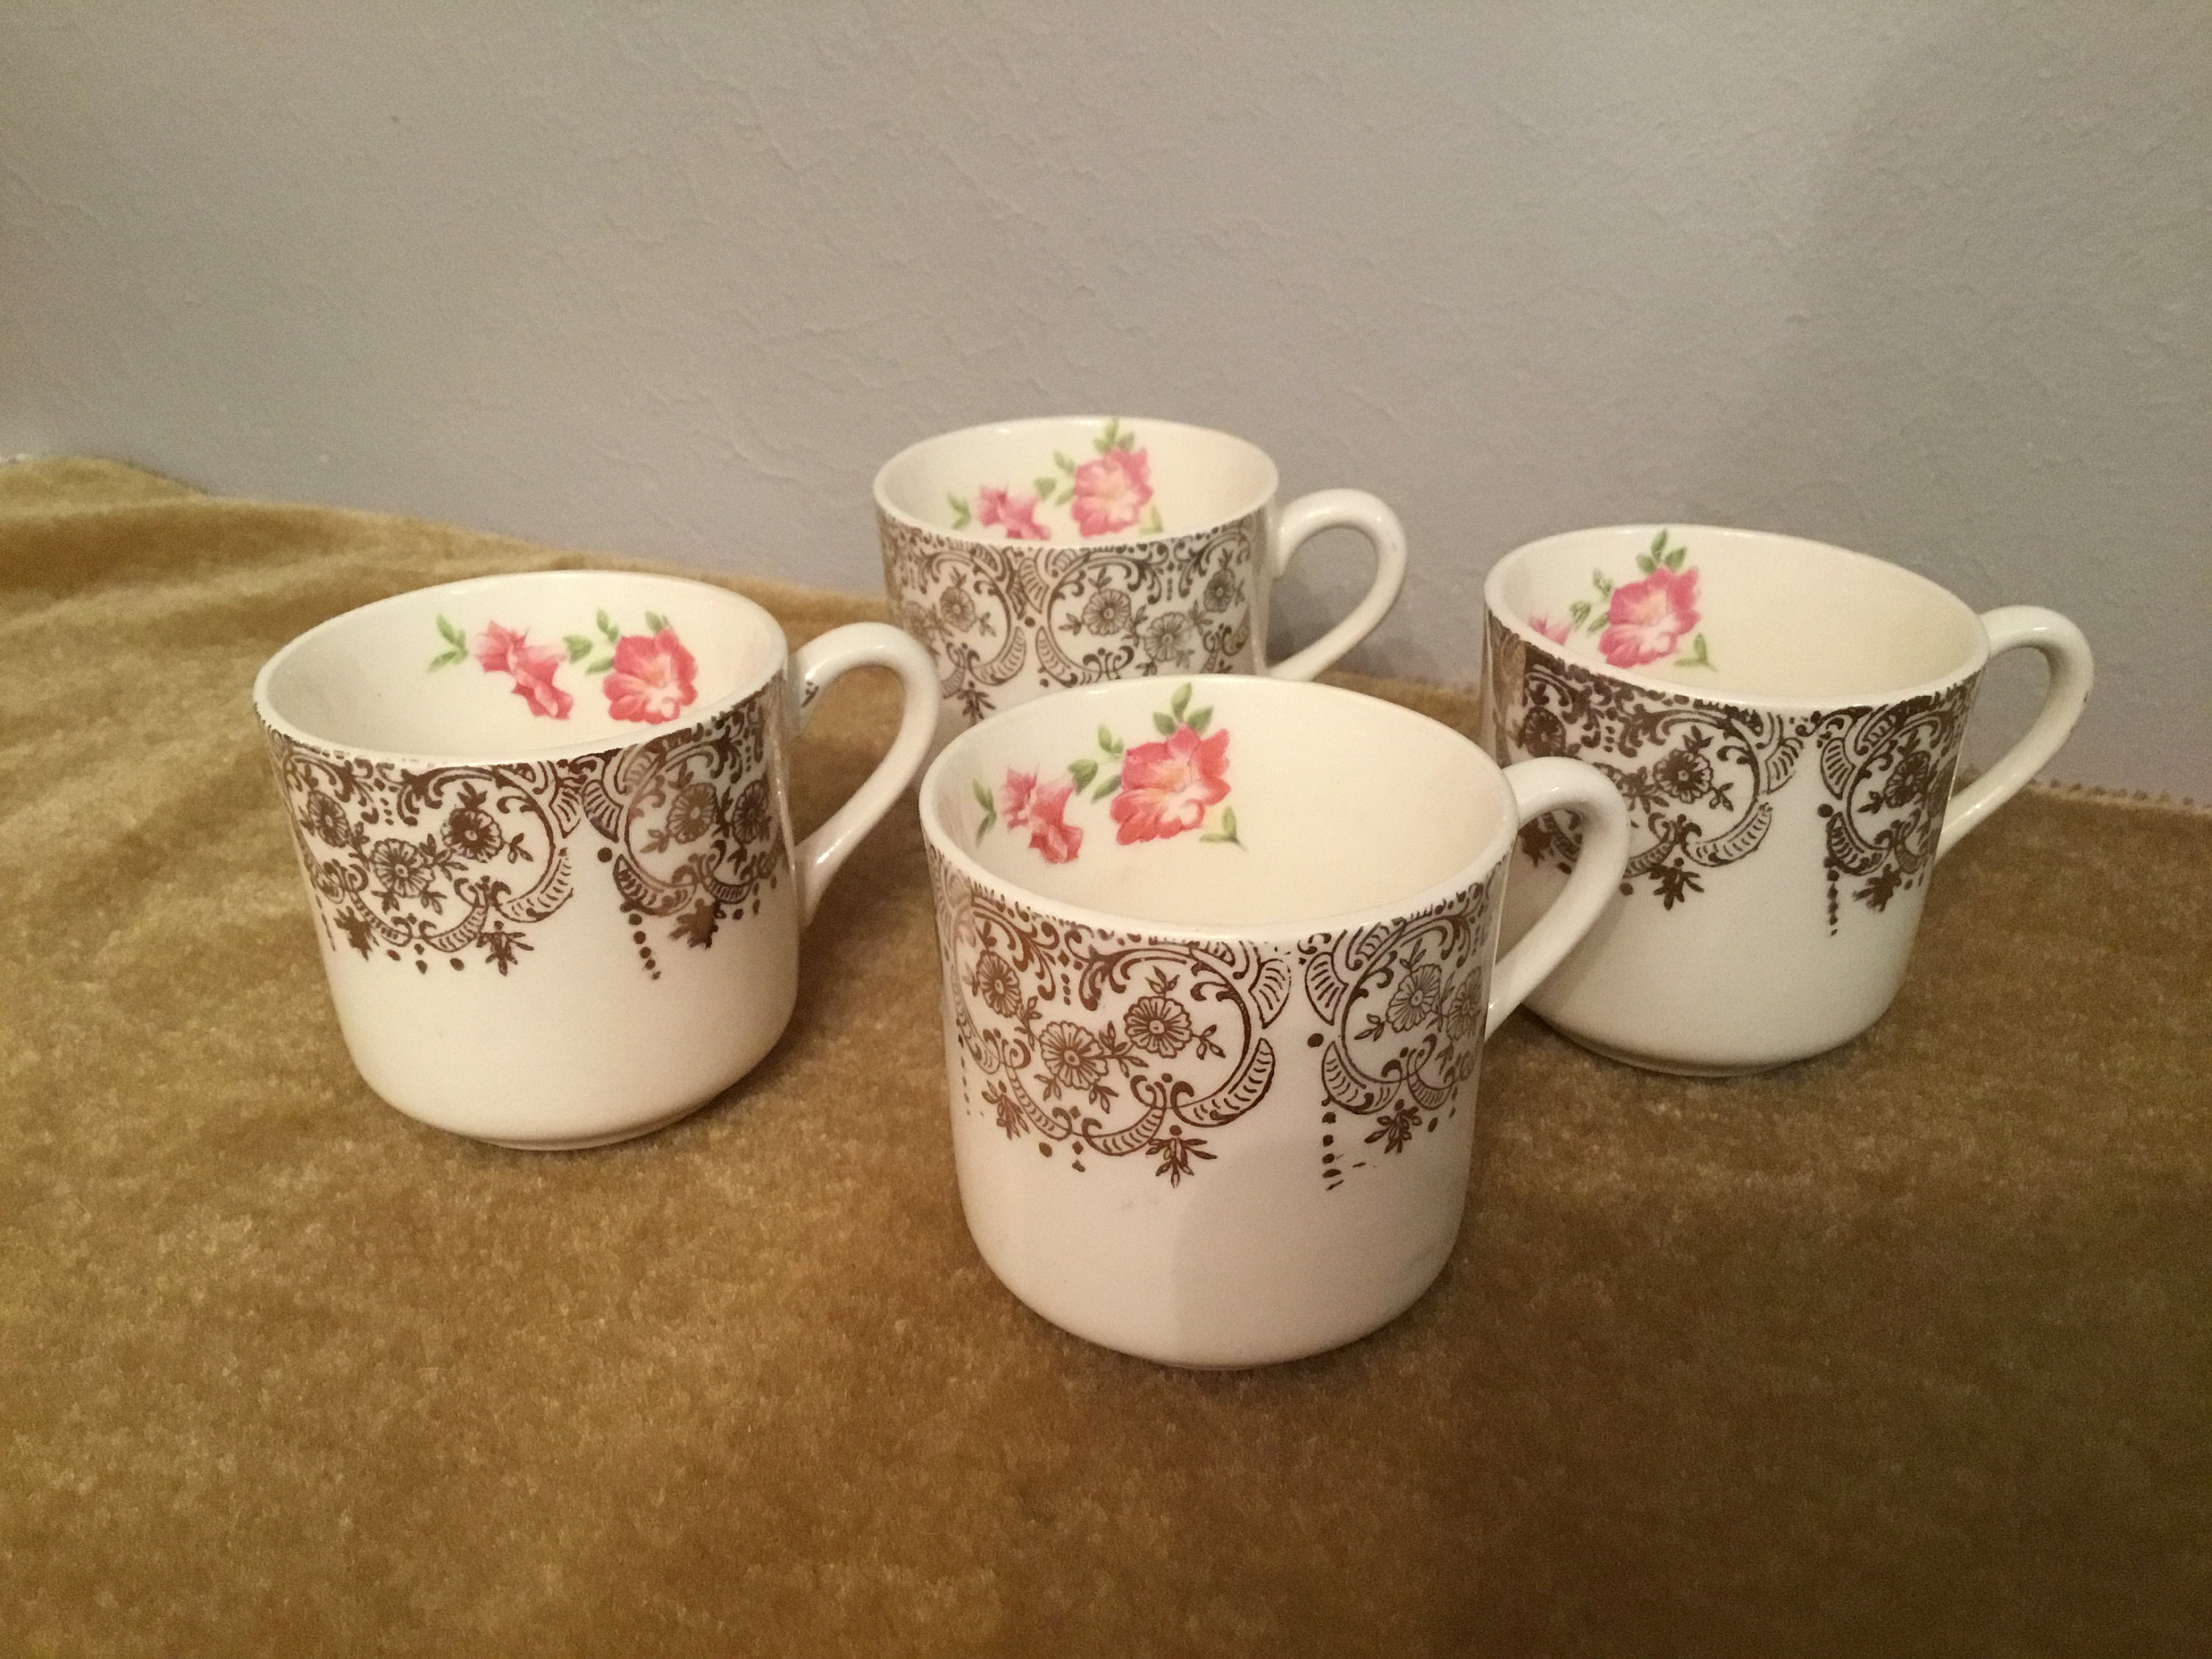 Cups Set S00 - Art of Living - Home